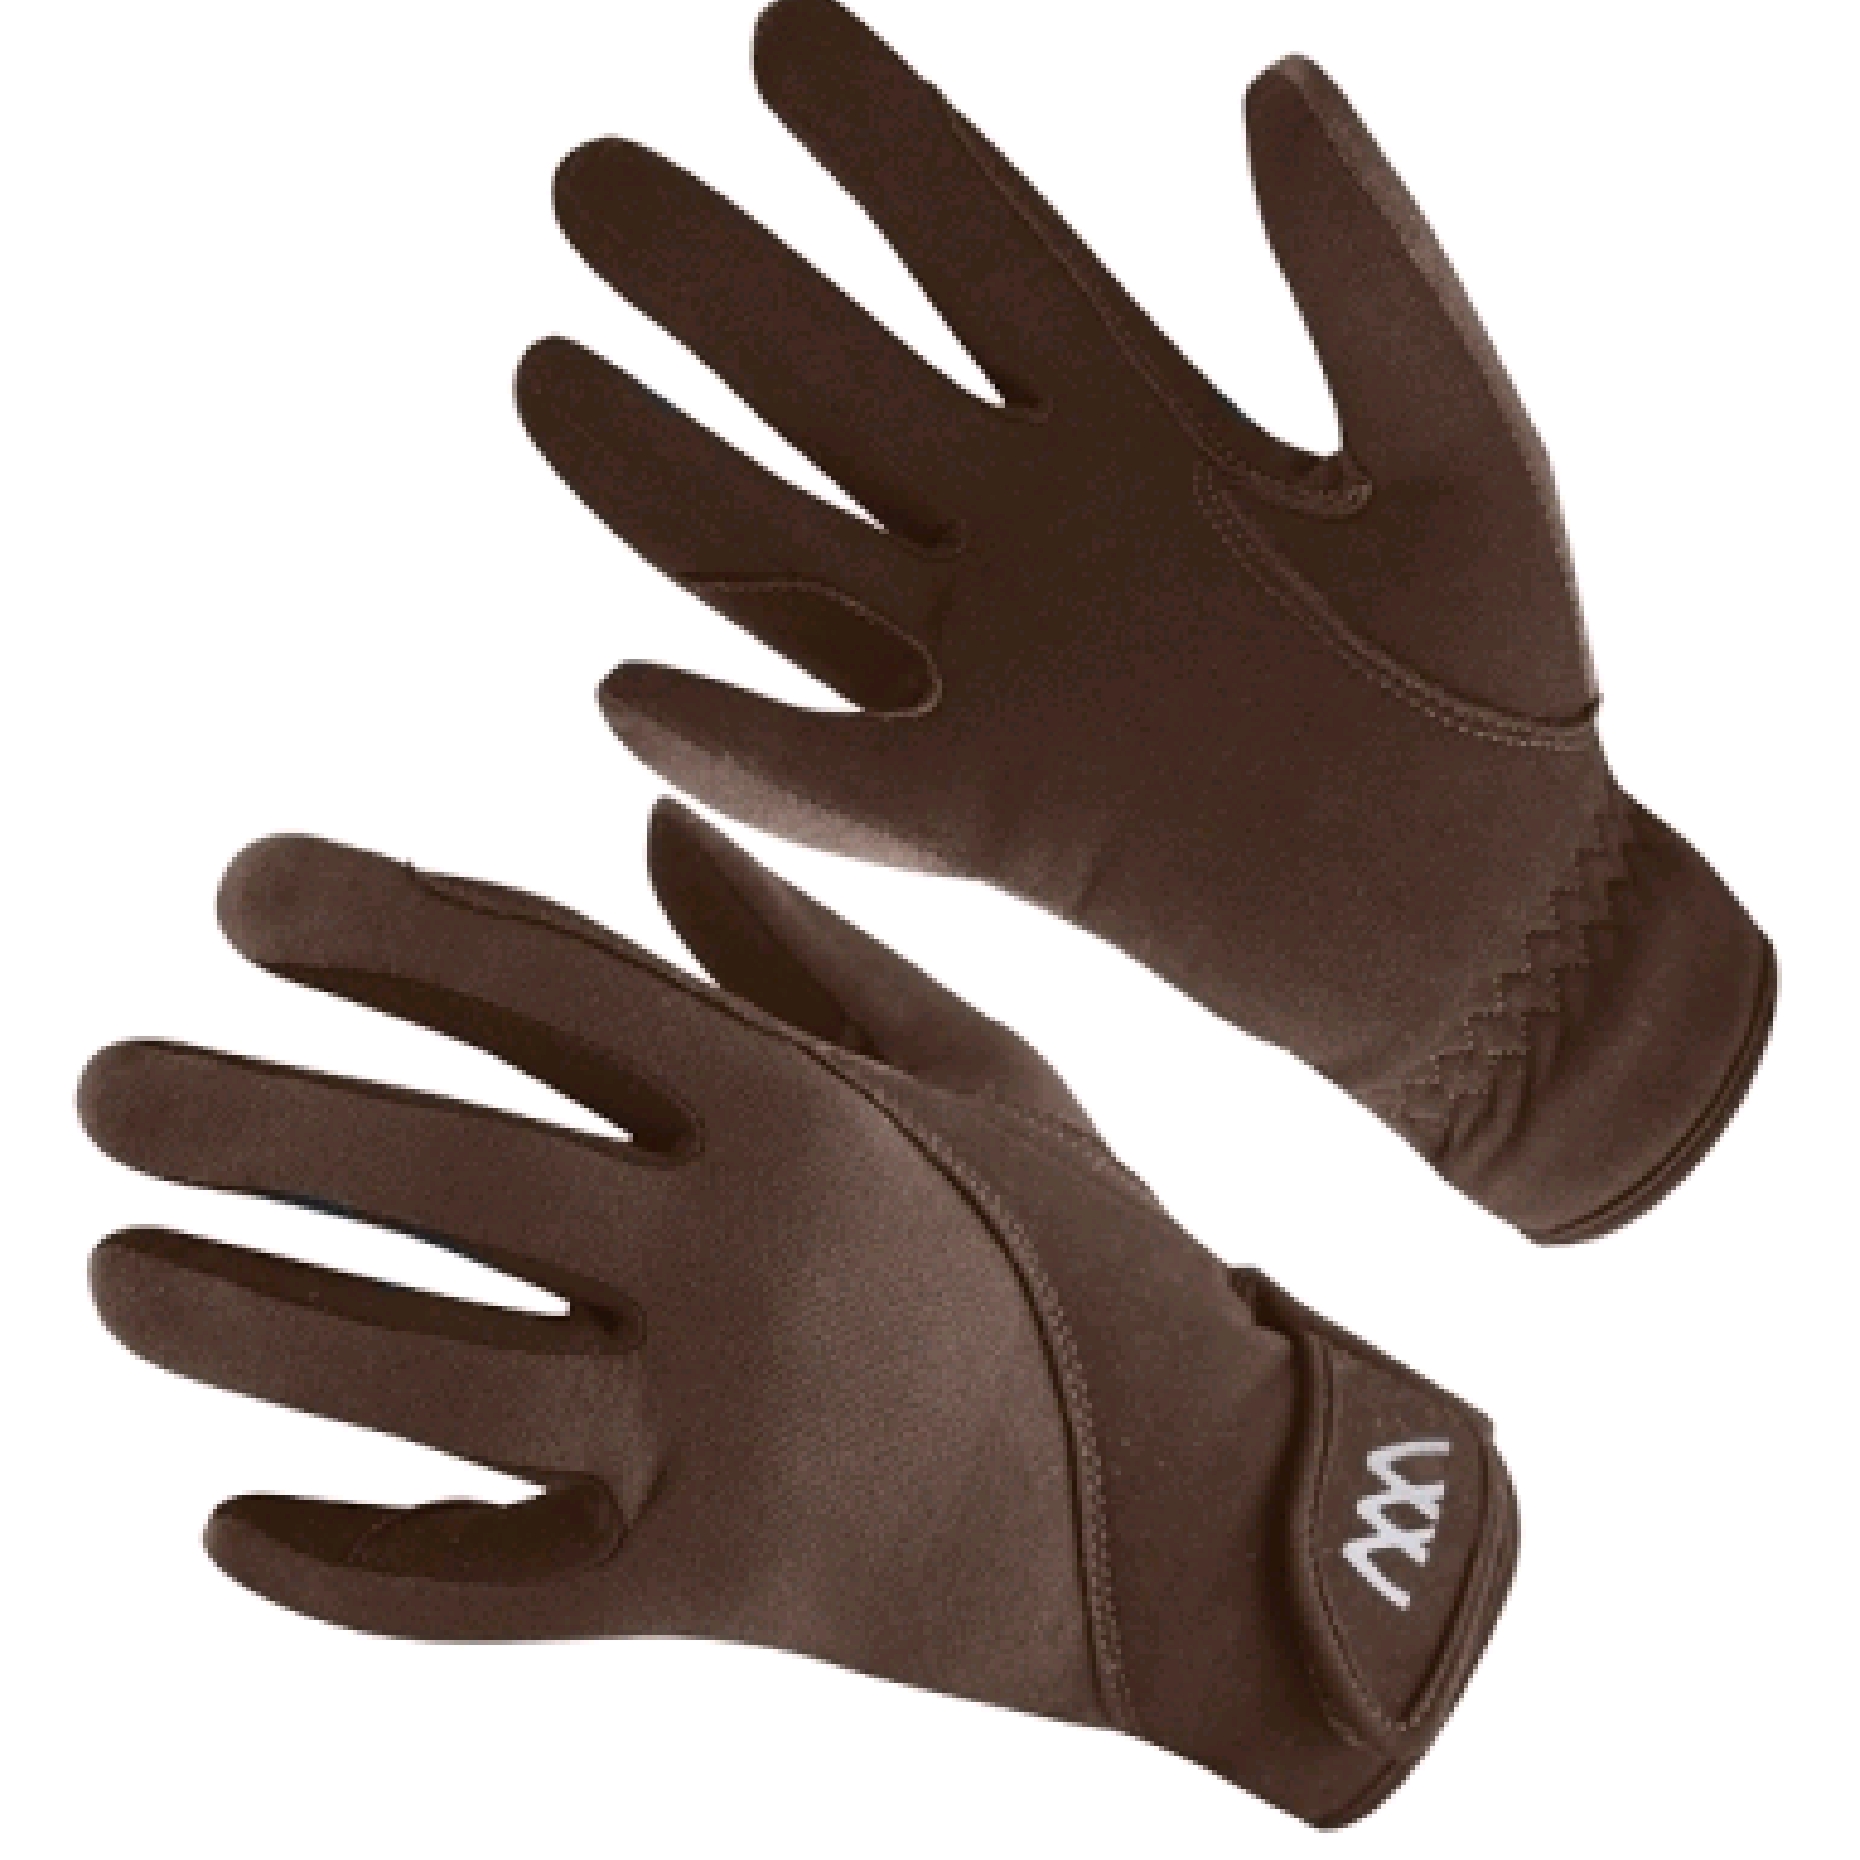 Woof Wear Precision Thermal Riding Gloves